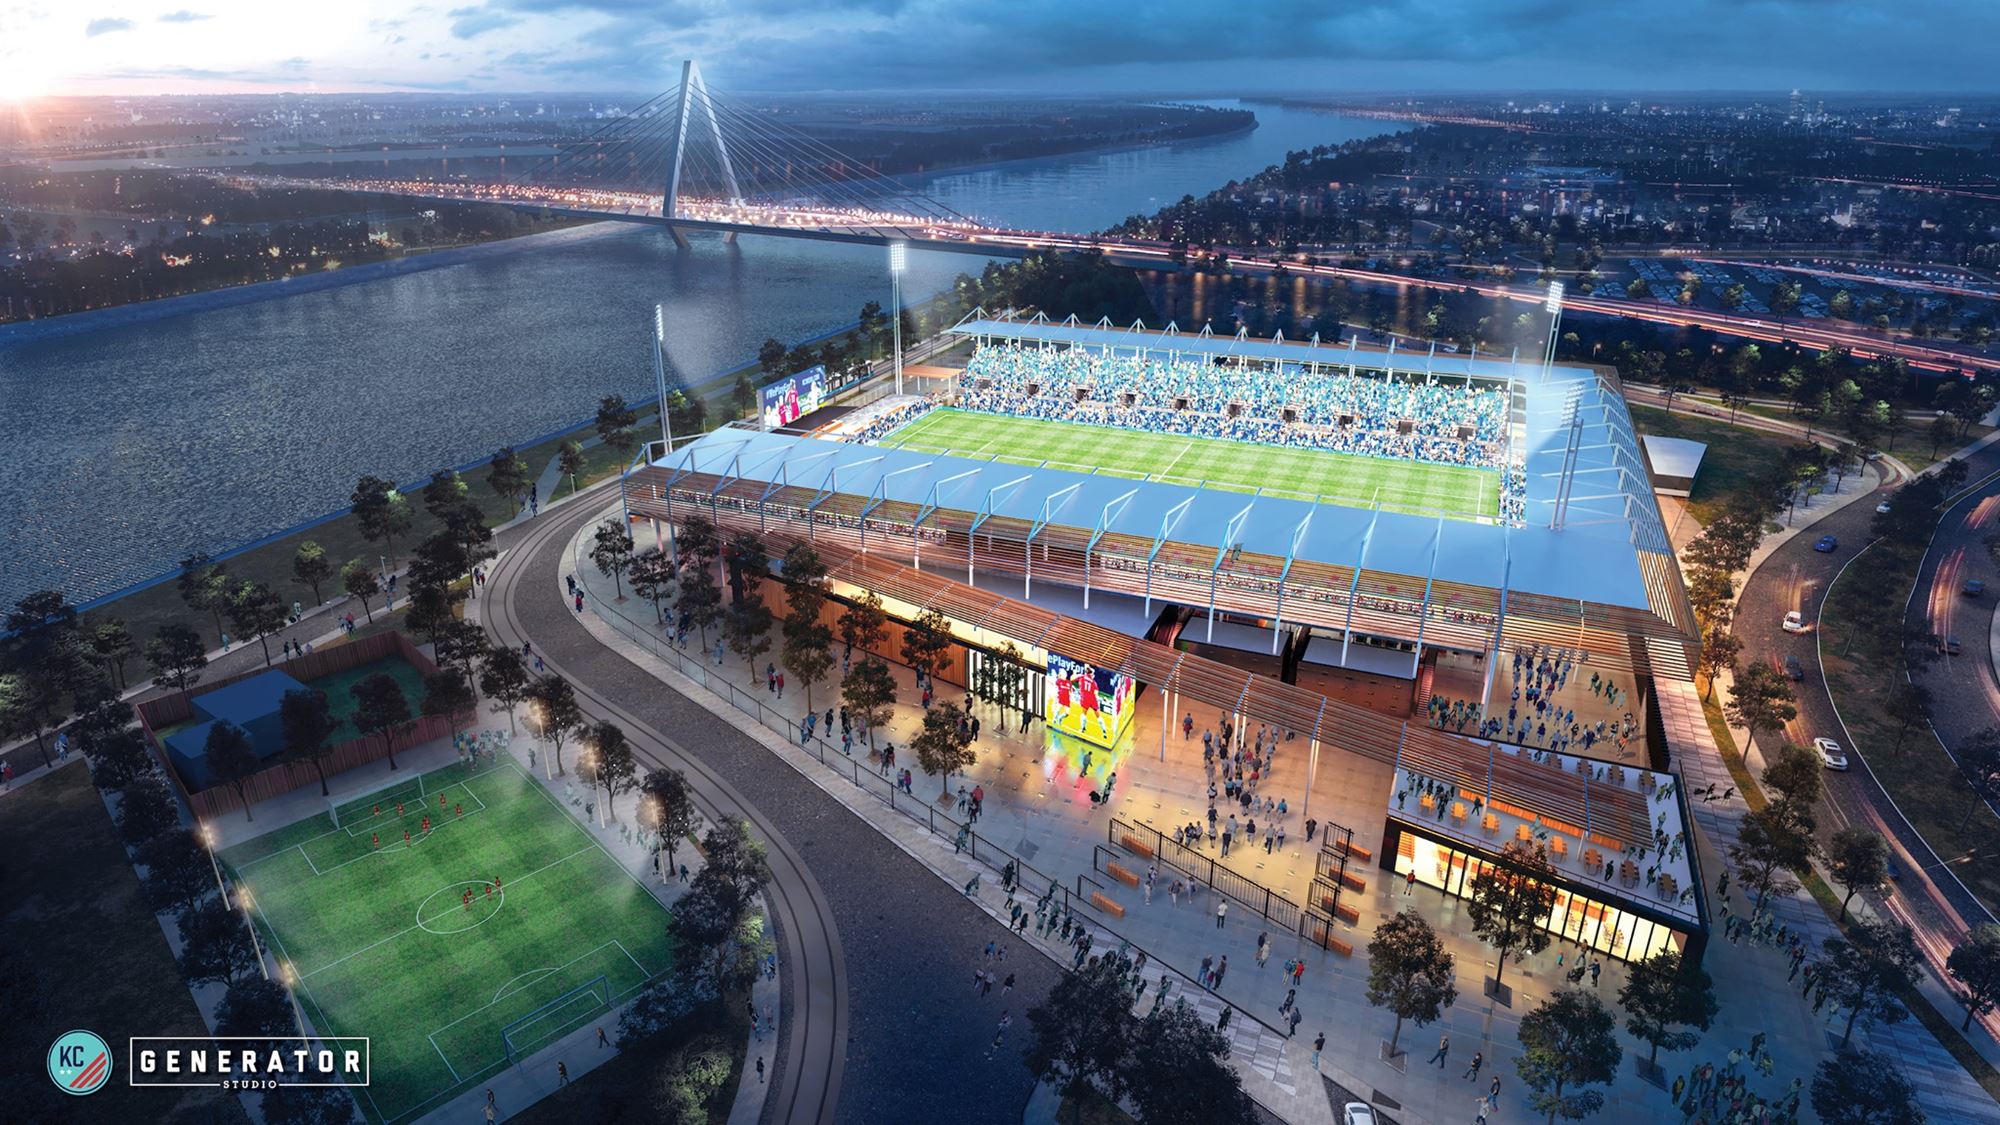 Confluence to serve as landscape architect for new KC NWSL stadium